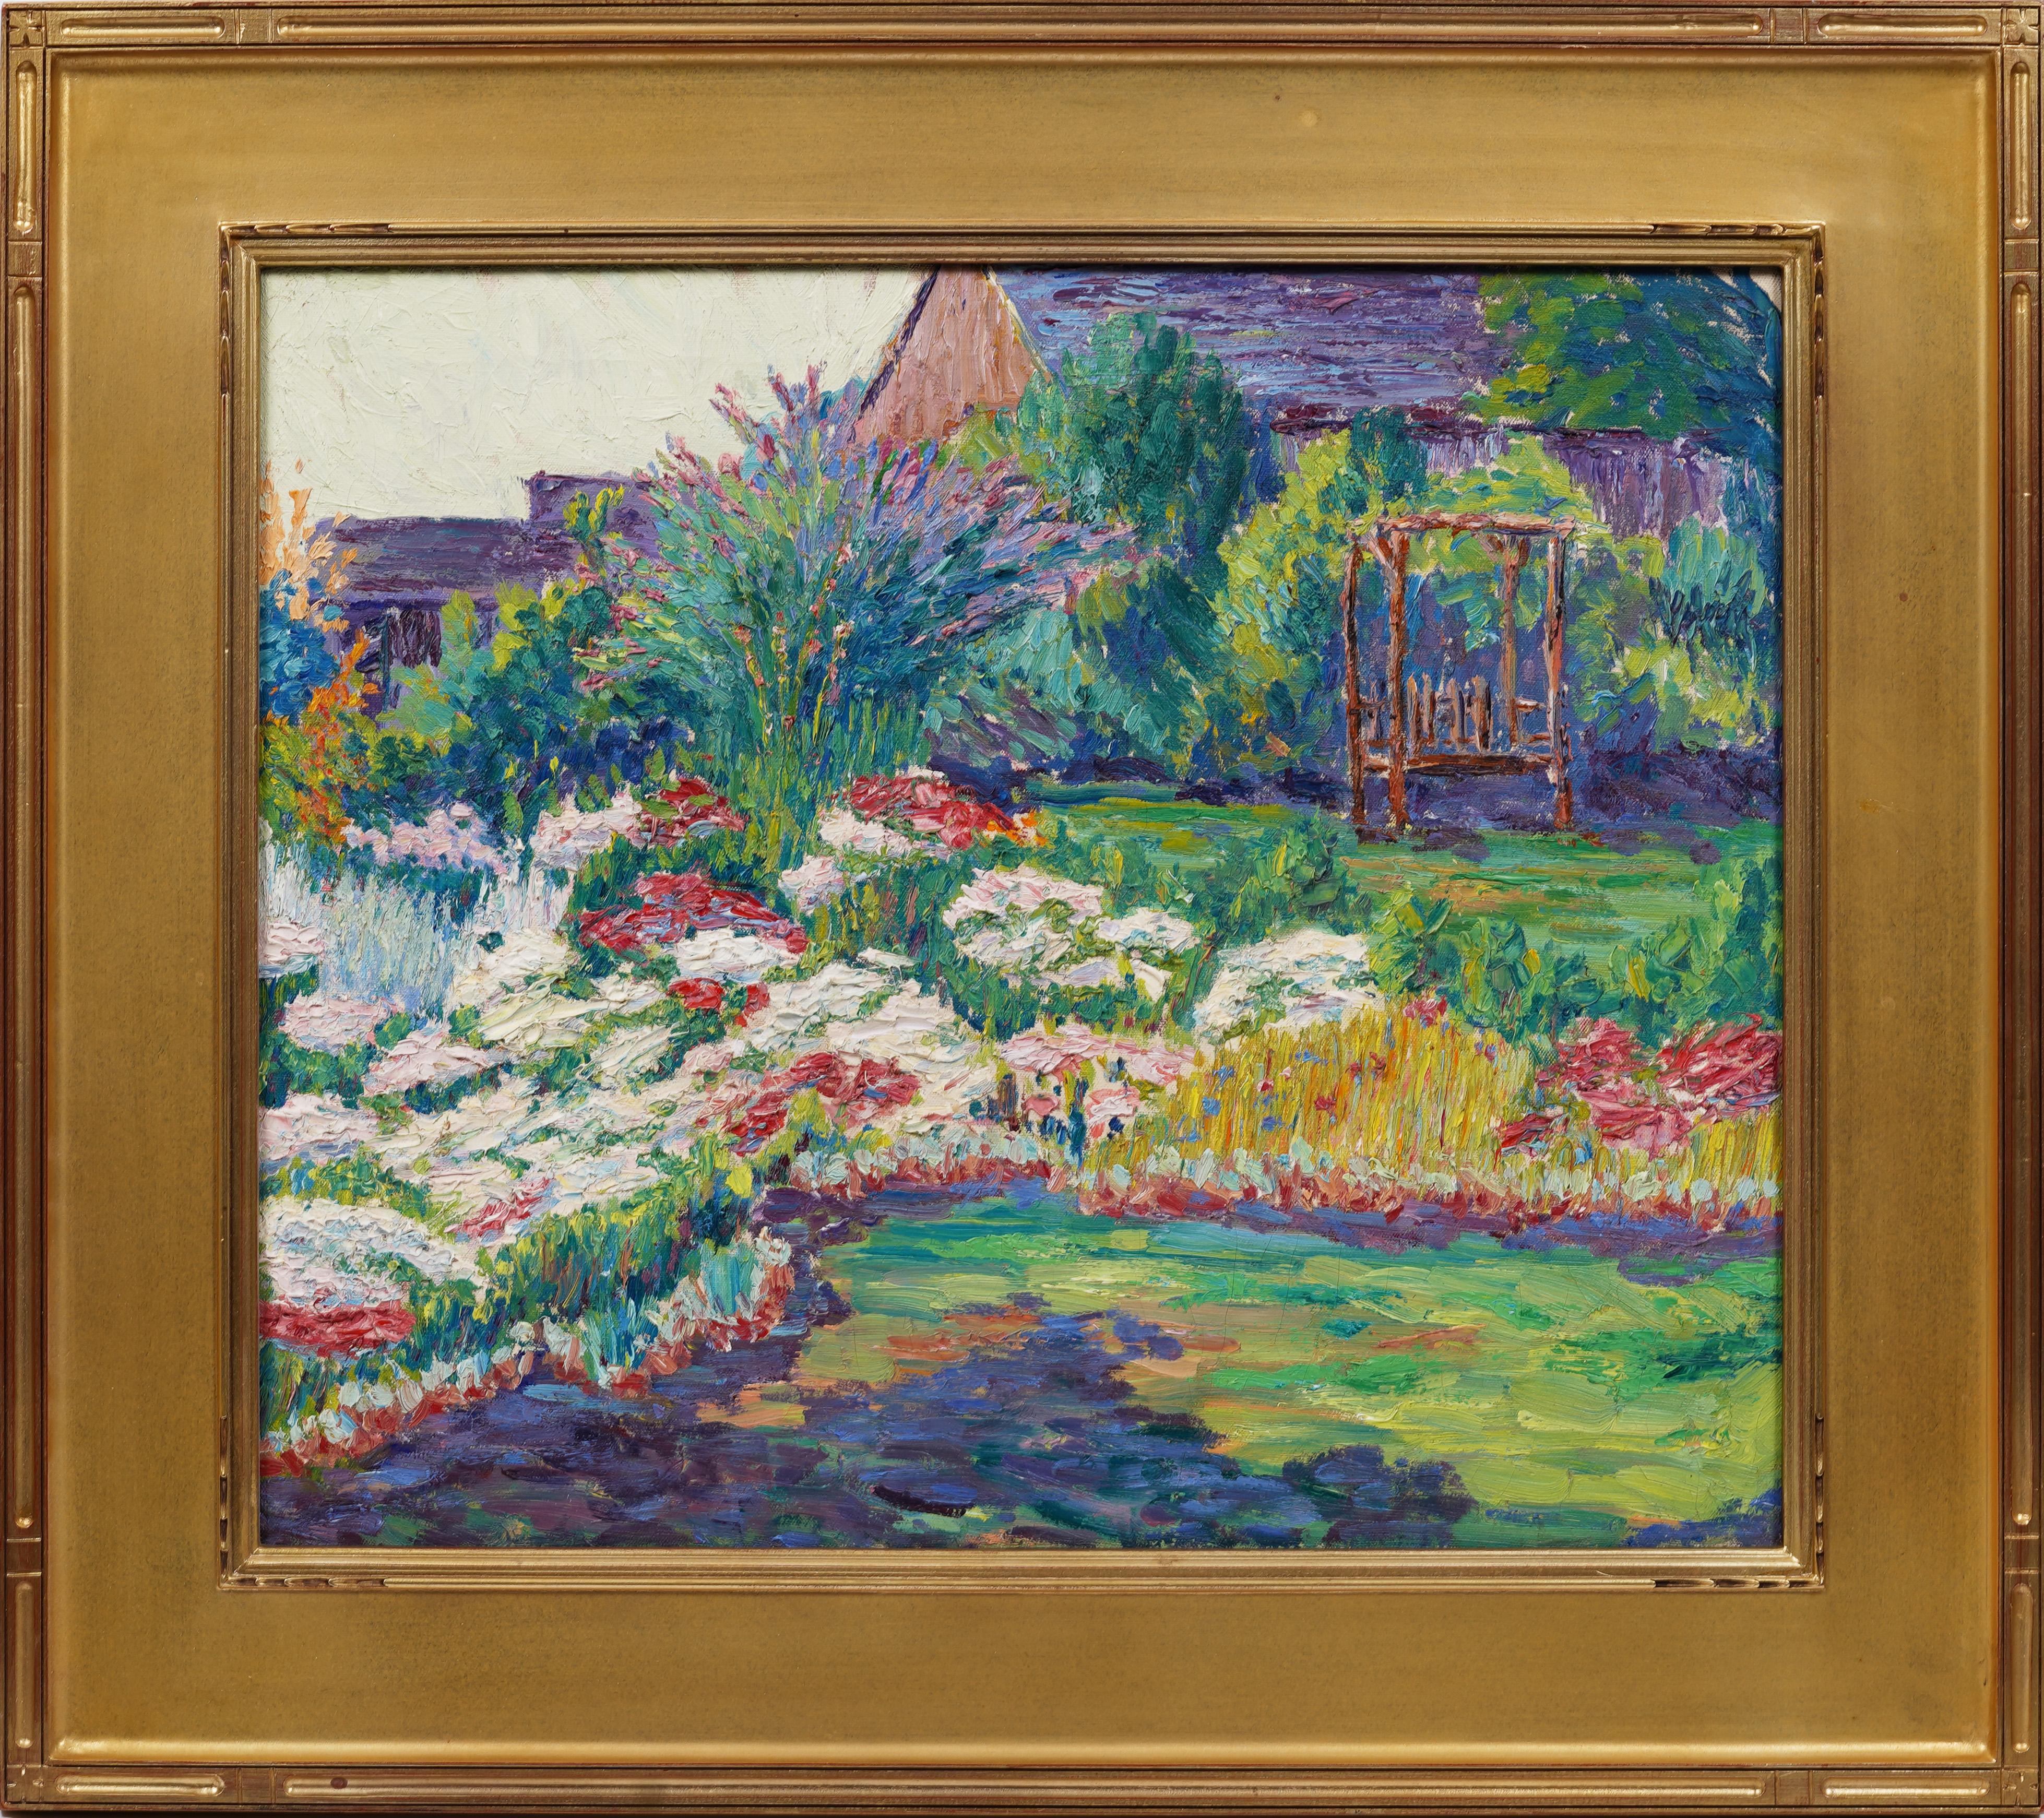 Antique American impressionist flower garden landscape oil painting.  Oil on canvas.  Framed.  No signature found.  